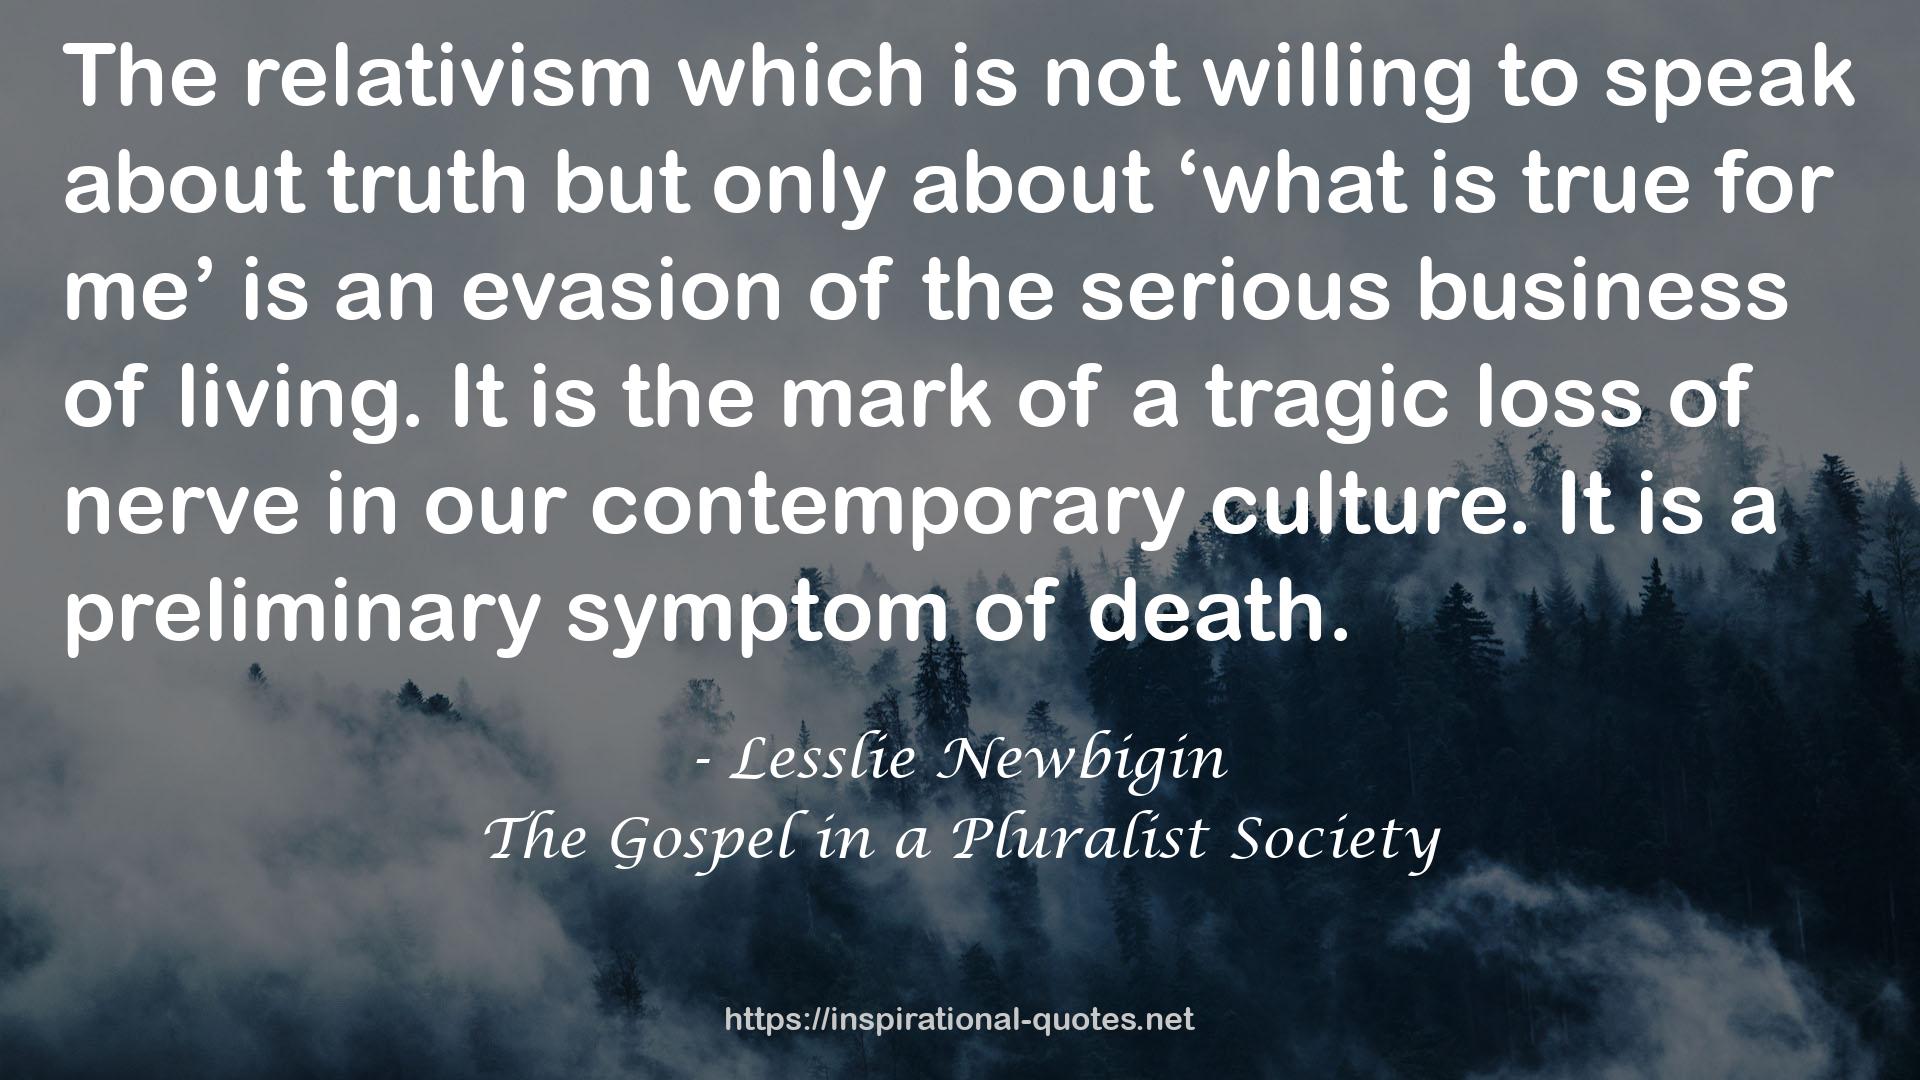 The Gospel in a Pluralist Society QUOTES